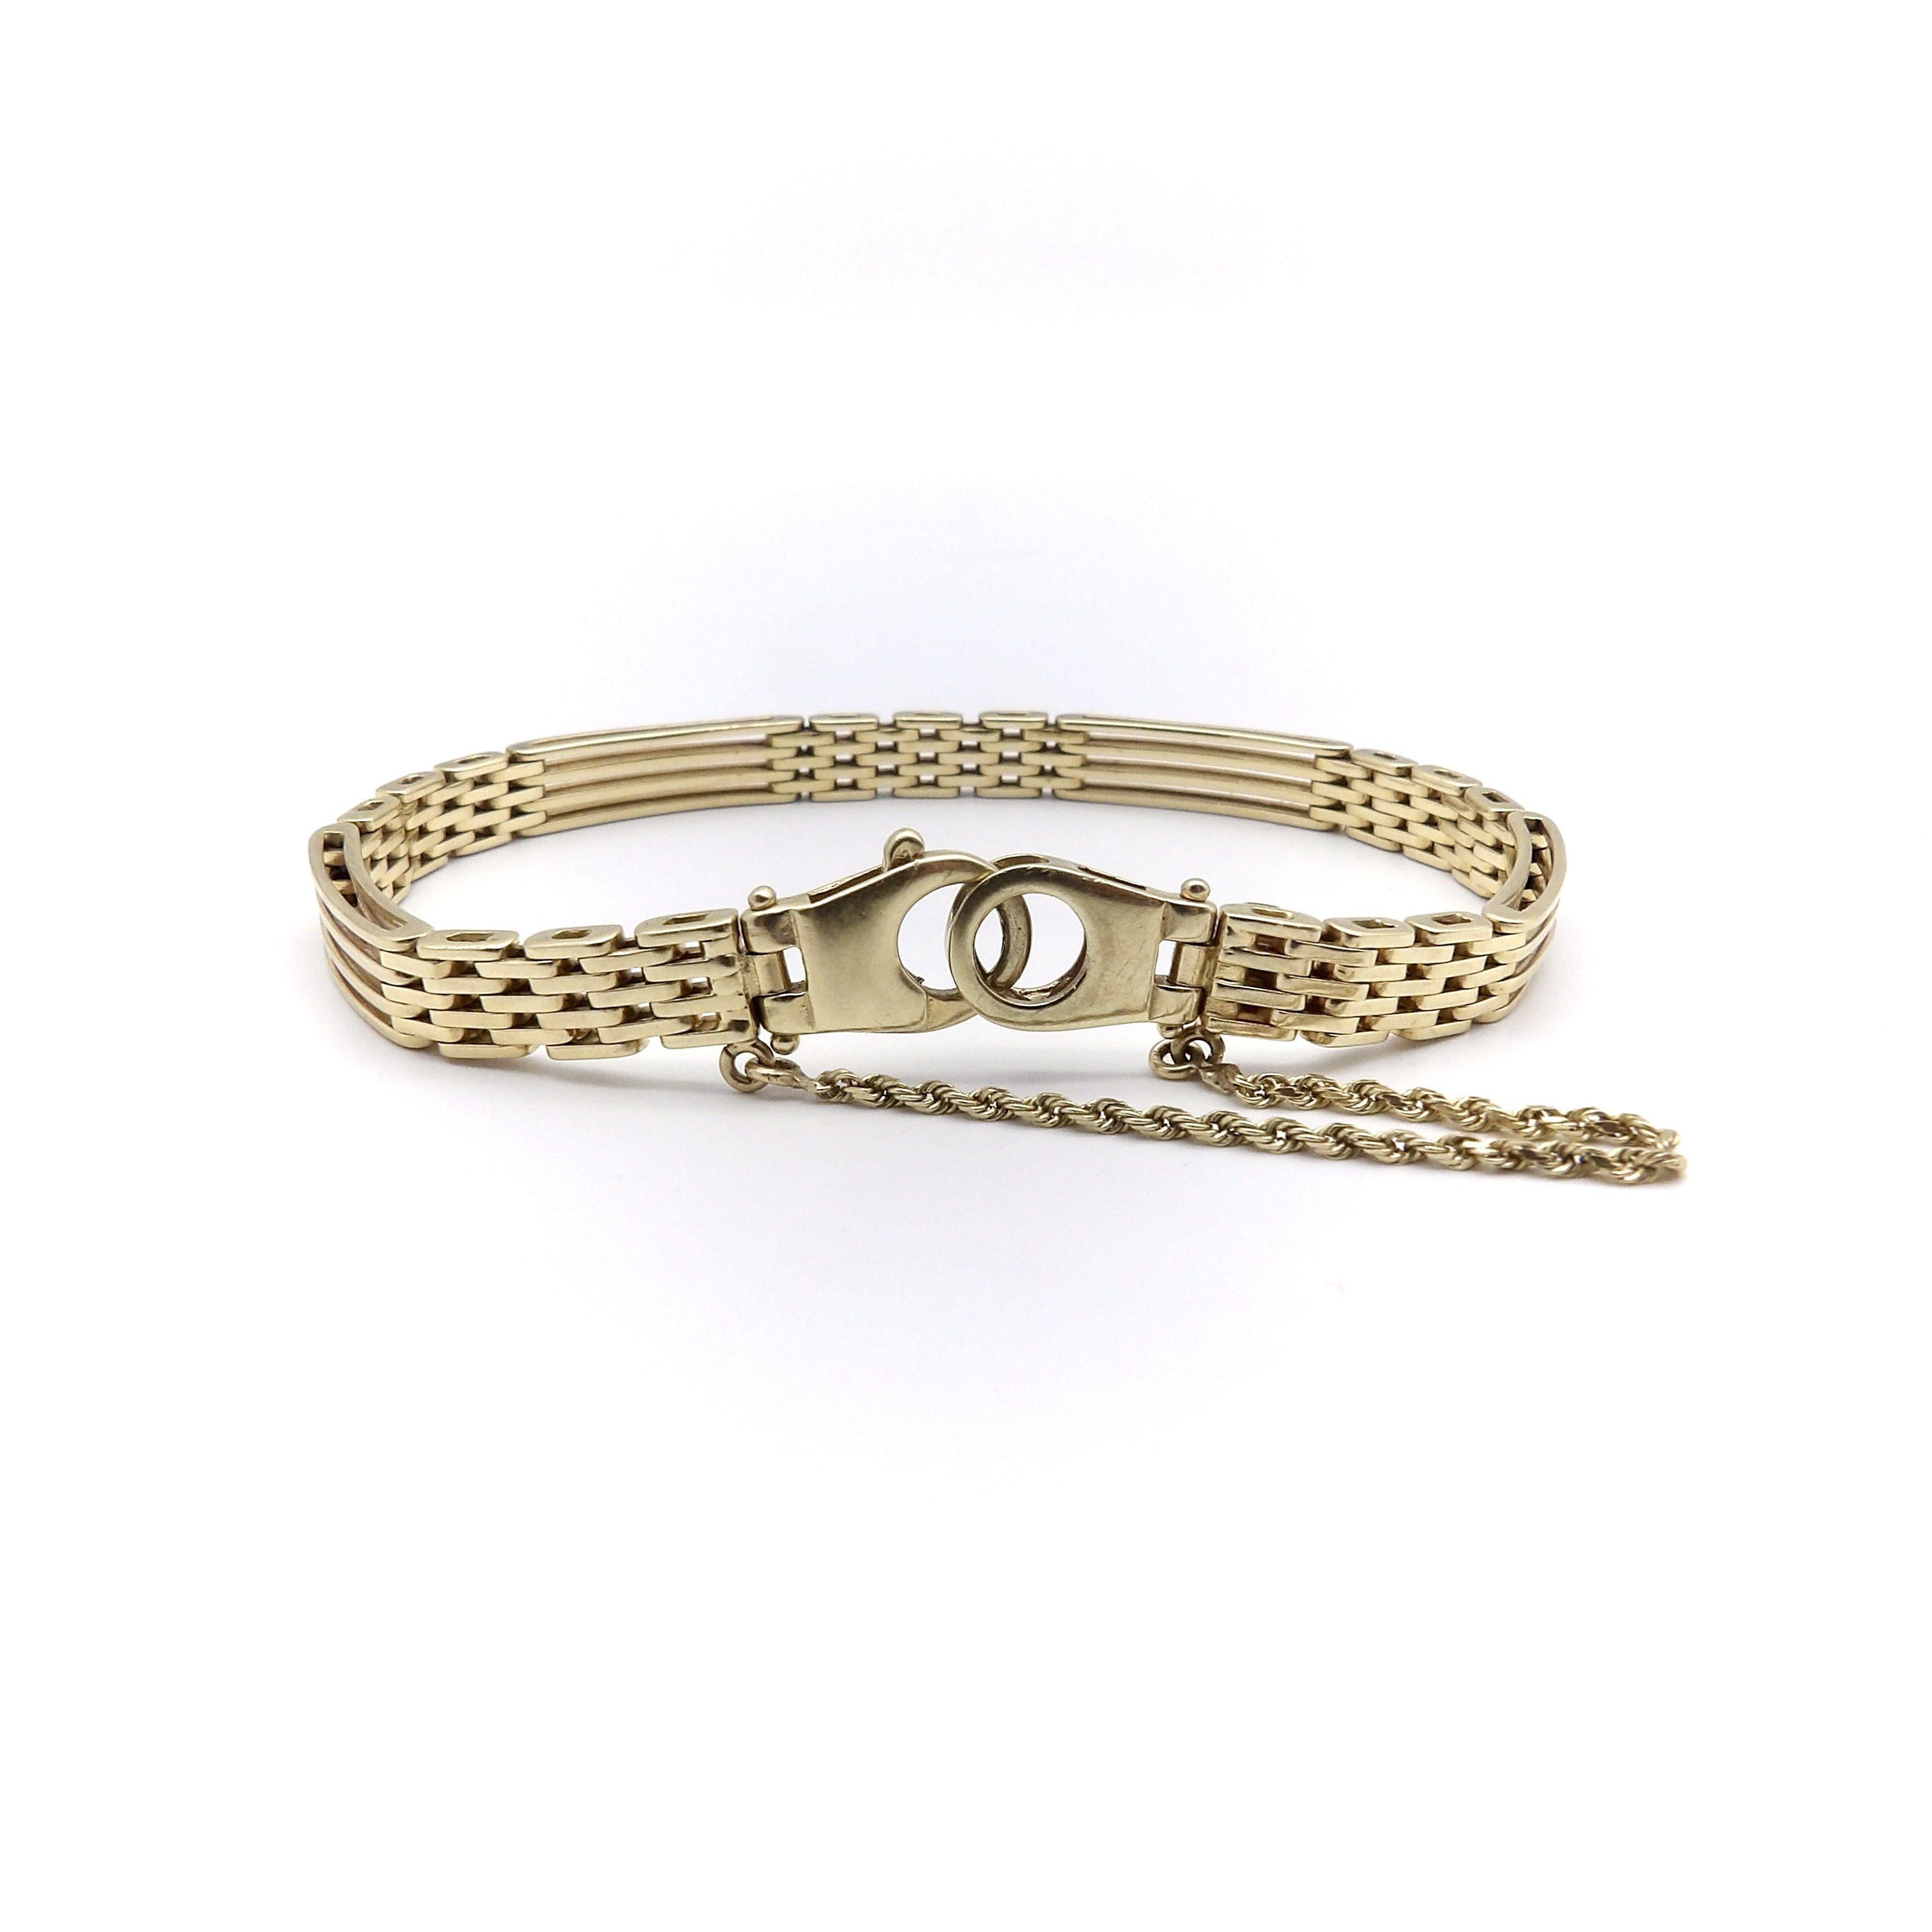 The style of this 14k gold Italian bracelet is reminiscent of an English gate bracelet. The piece is clean and sleek, with elongated bars that appear to be woven in every other section. The alternating lines create a mesmerizing pattern for a